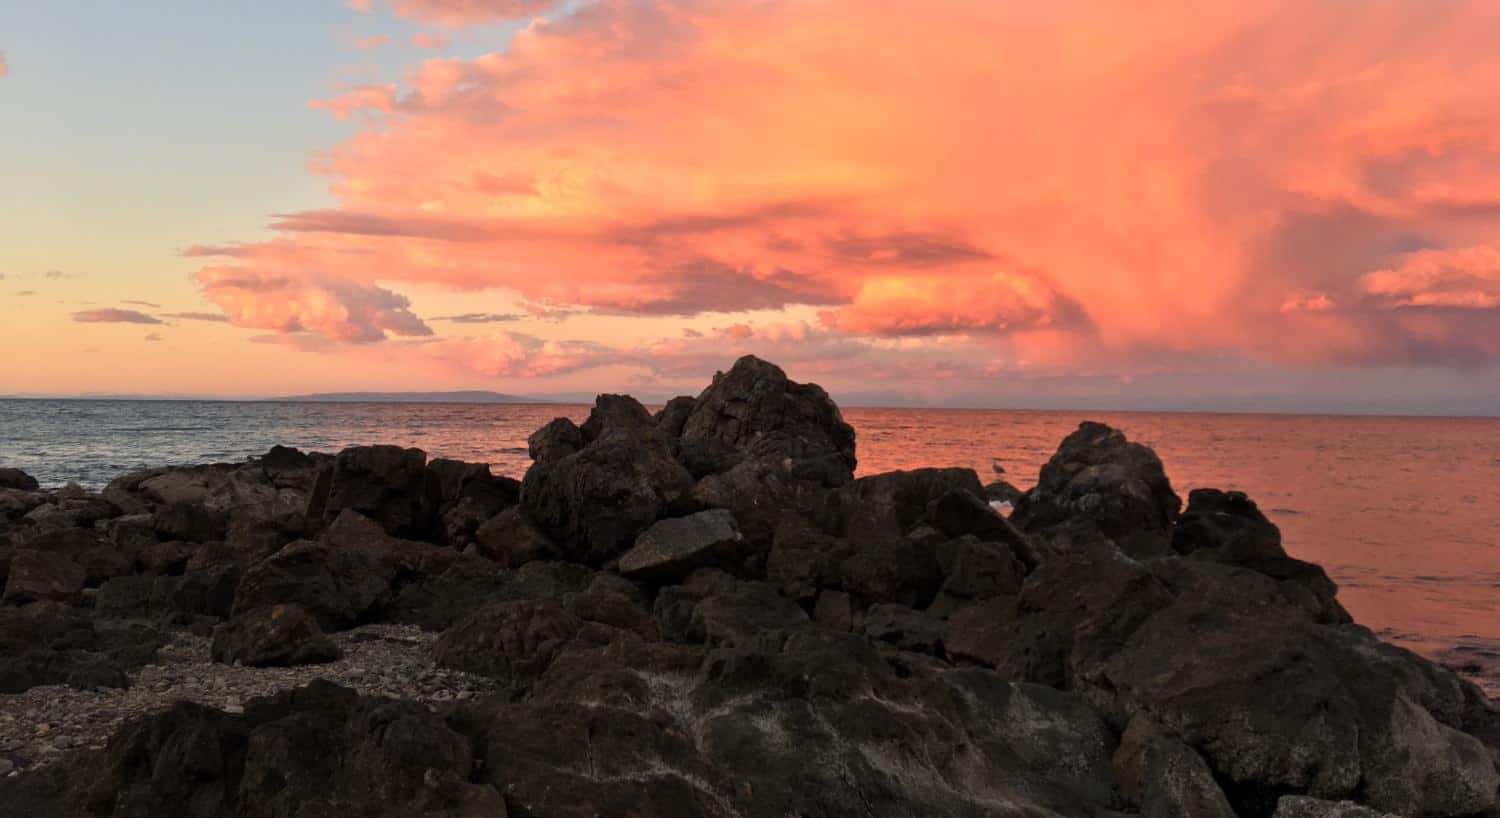 Large rocks with the ocean and pink colored clouds in the background